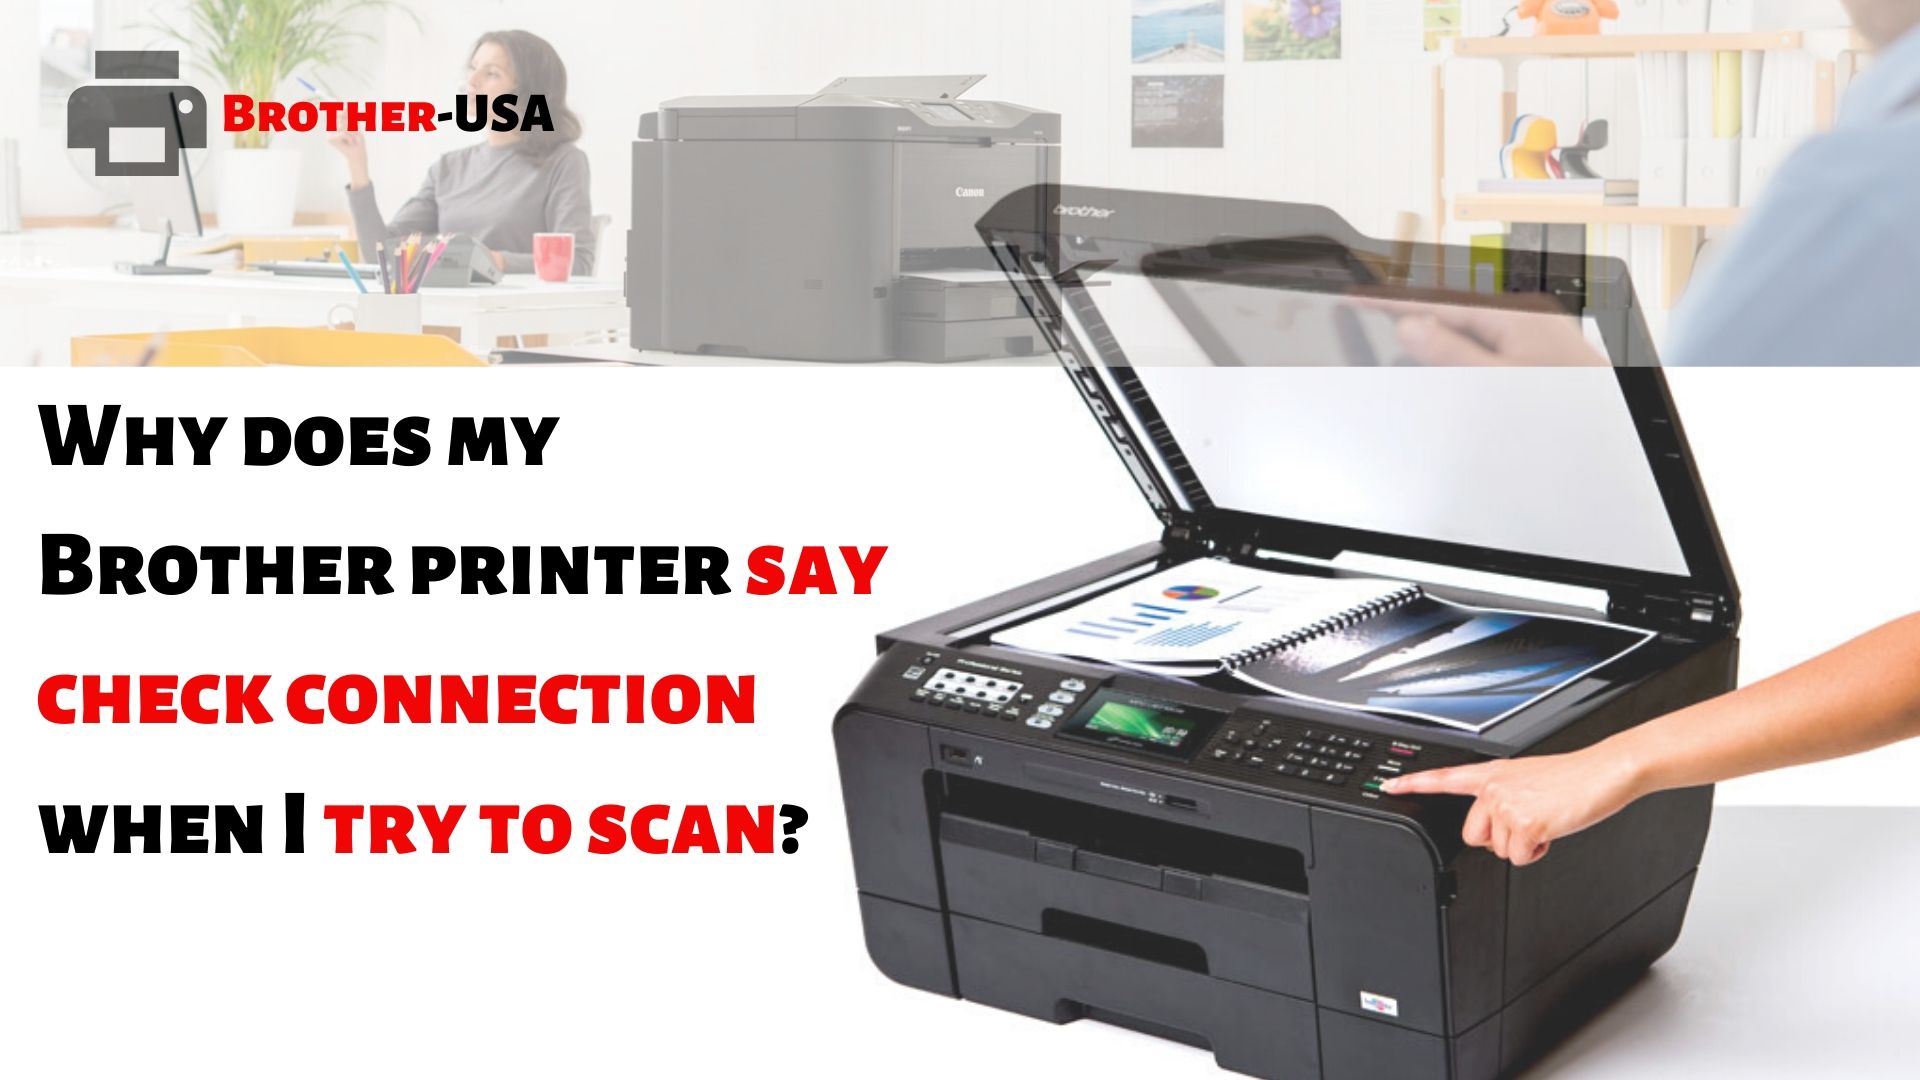 how to scan from printer to computer on network